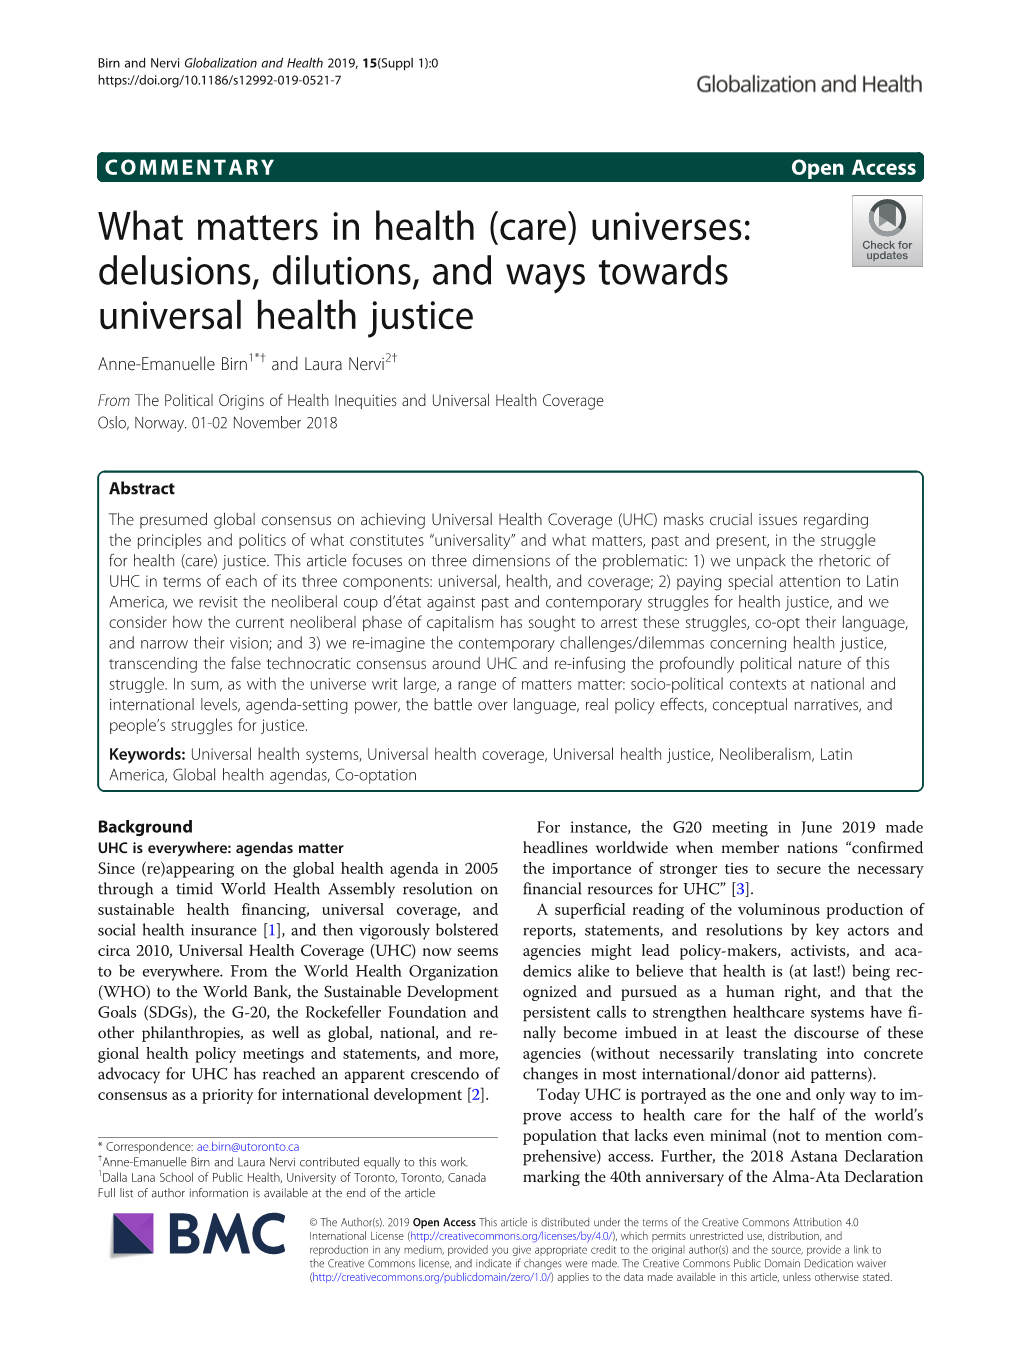 Delusions, Dilutions, and Ways Towards Universal Health Justice Anne-Emanuelle Birn1*† and Laura Nervi2†